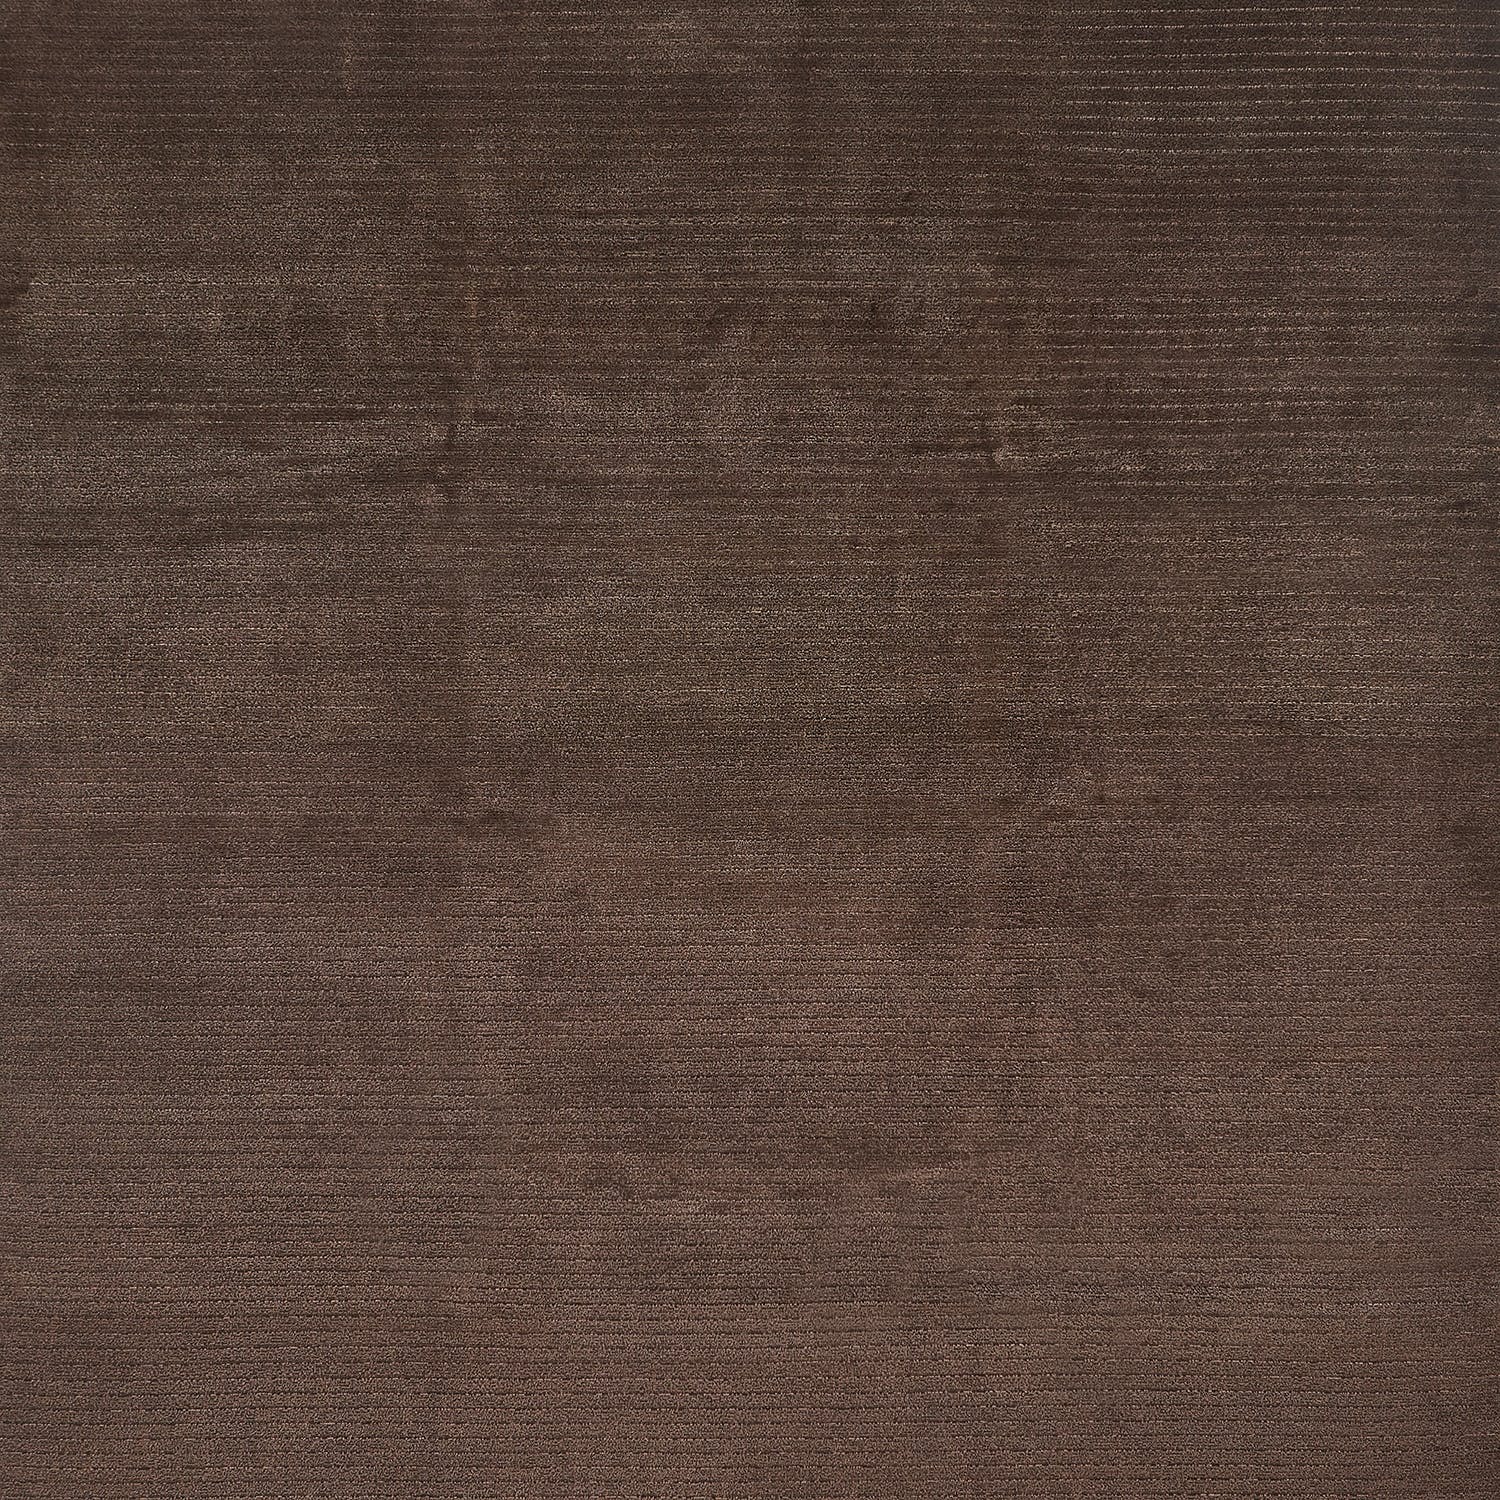 Close-up of a deep brown, textured fabric with subtle variations.